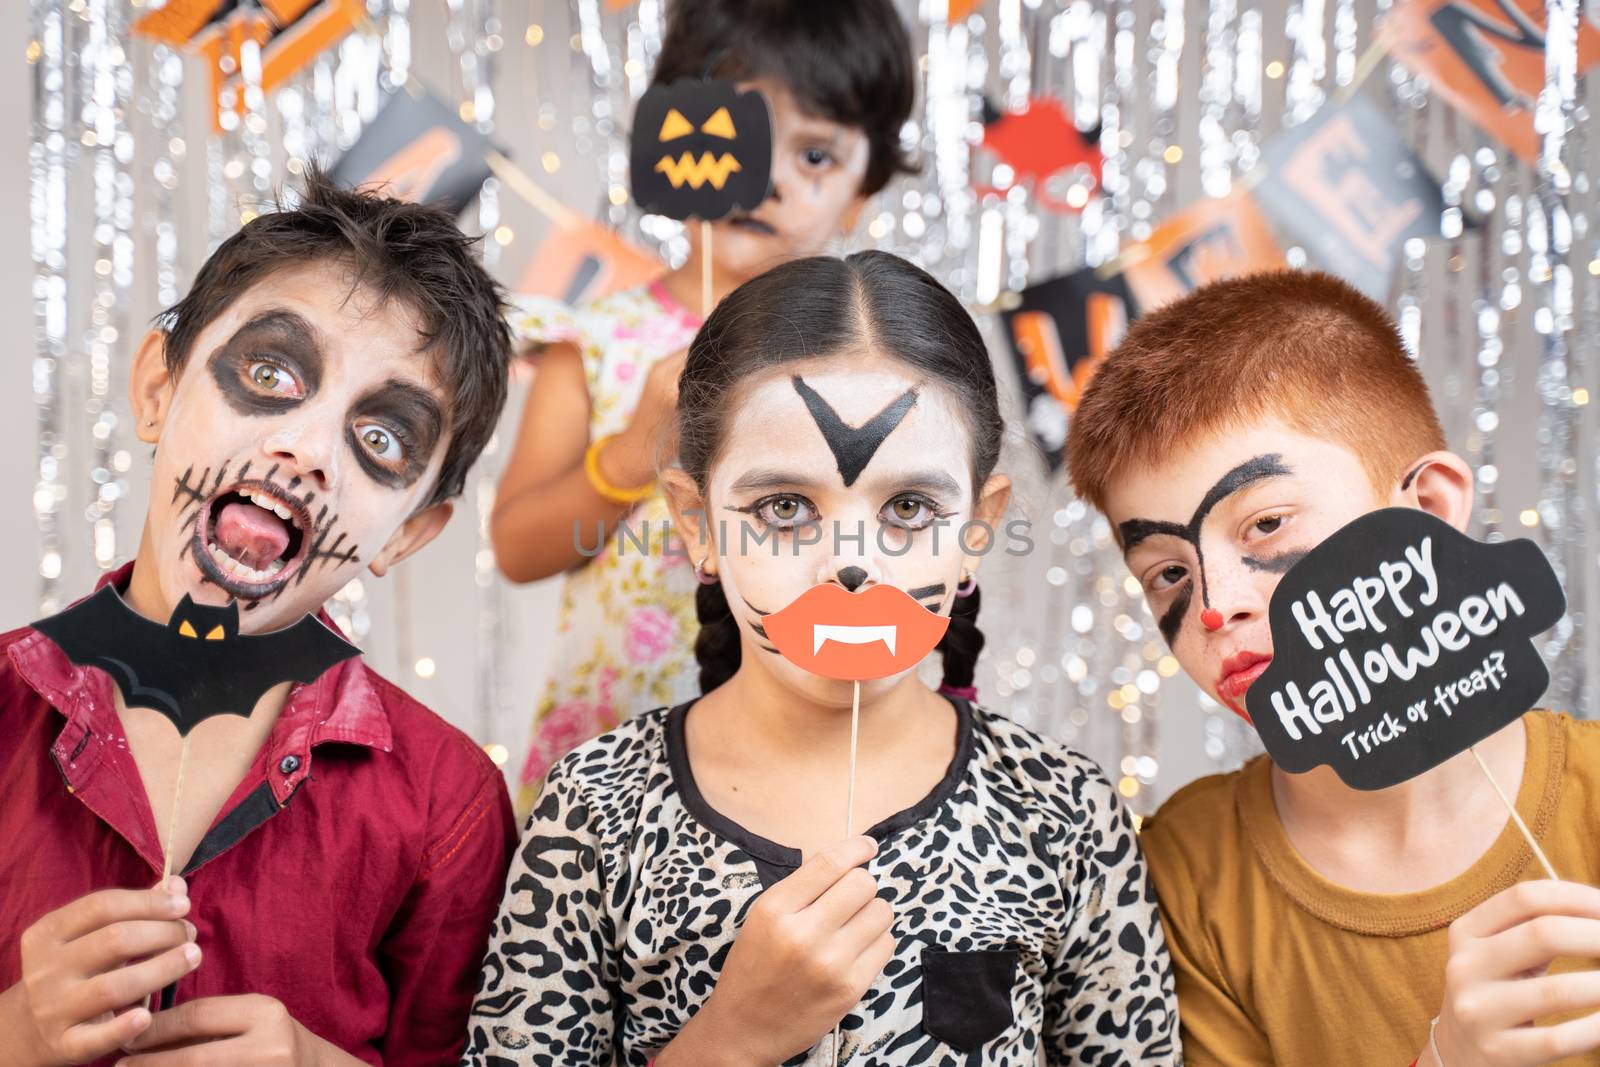 Group of kids in Halloween costumes making gesticulating scary or spooky faces by holding booth sprops on decorated background by looking into camera. by lakshmiprasad.maski@gmai.com